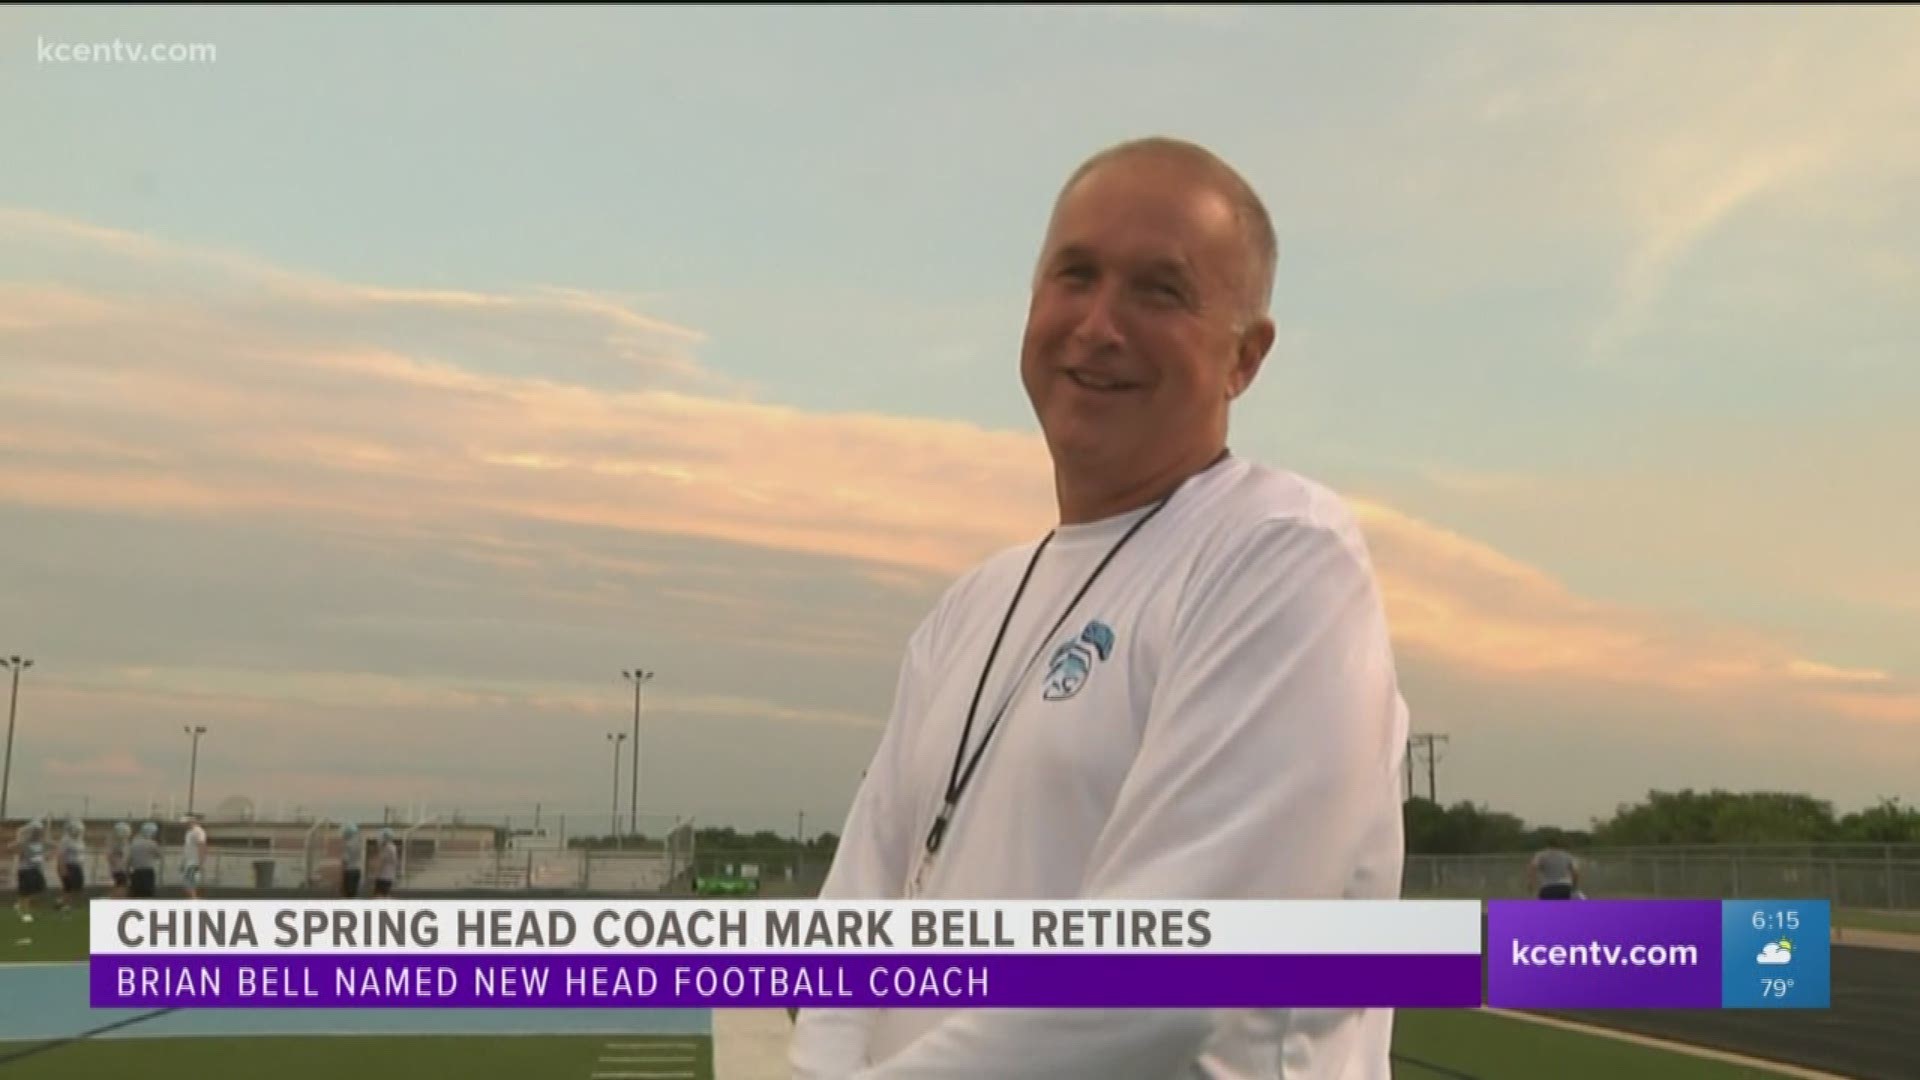 Mark Bell's son and offensive coordinator Brian Bell will take over as head coach